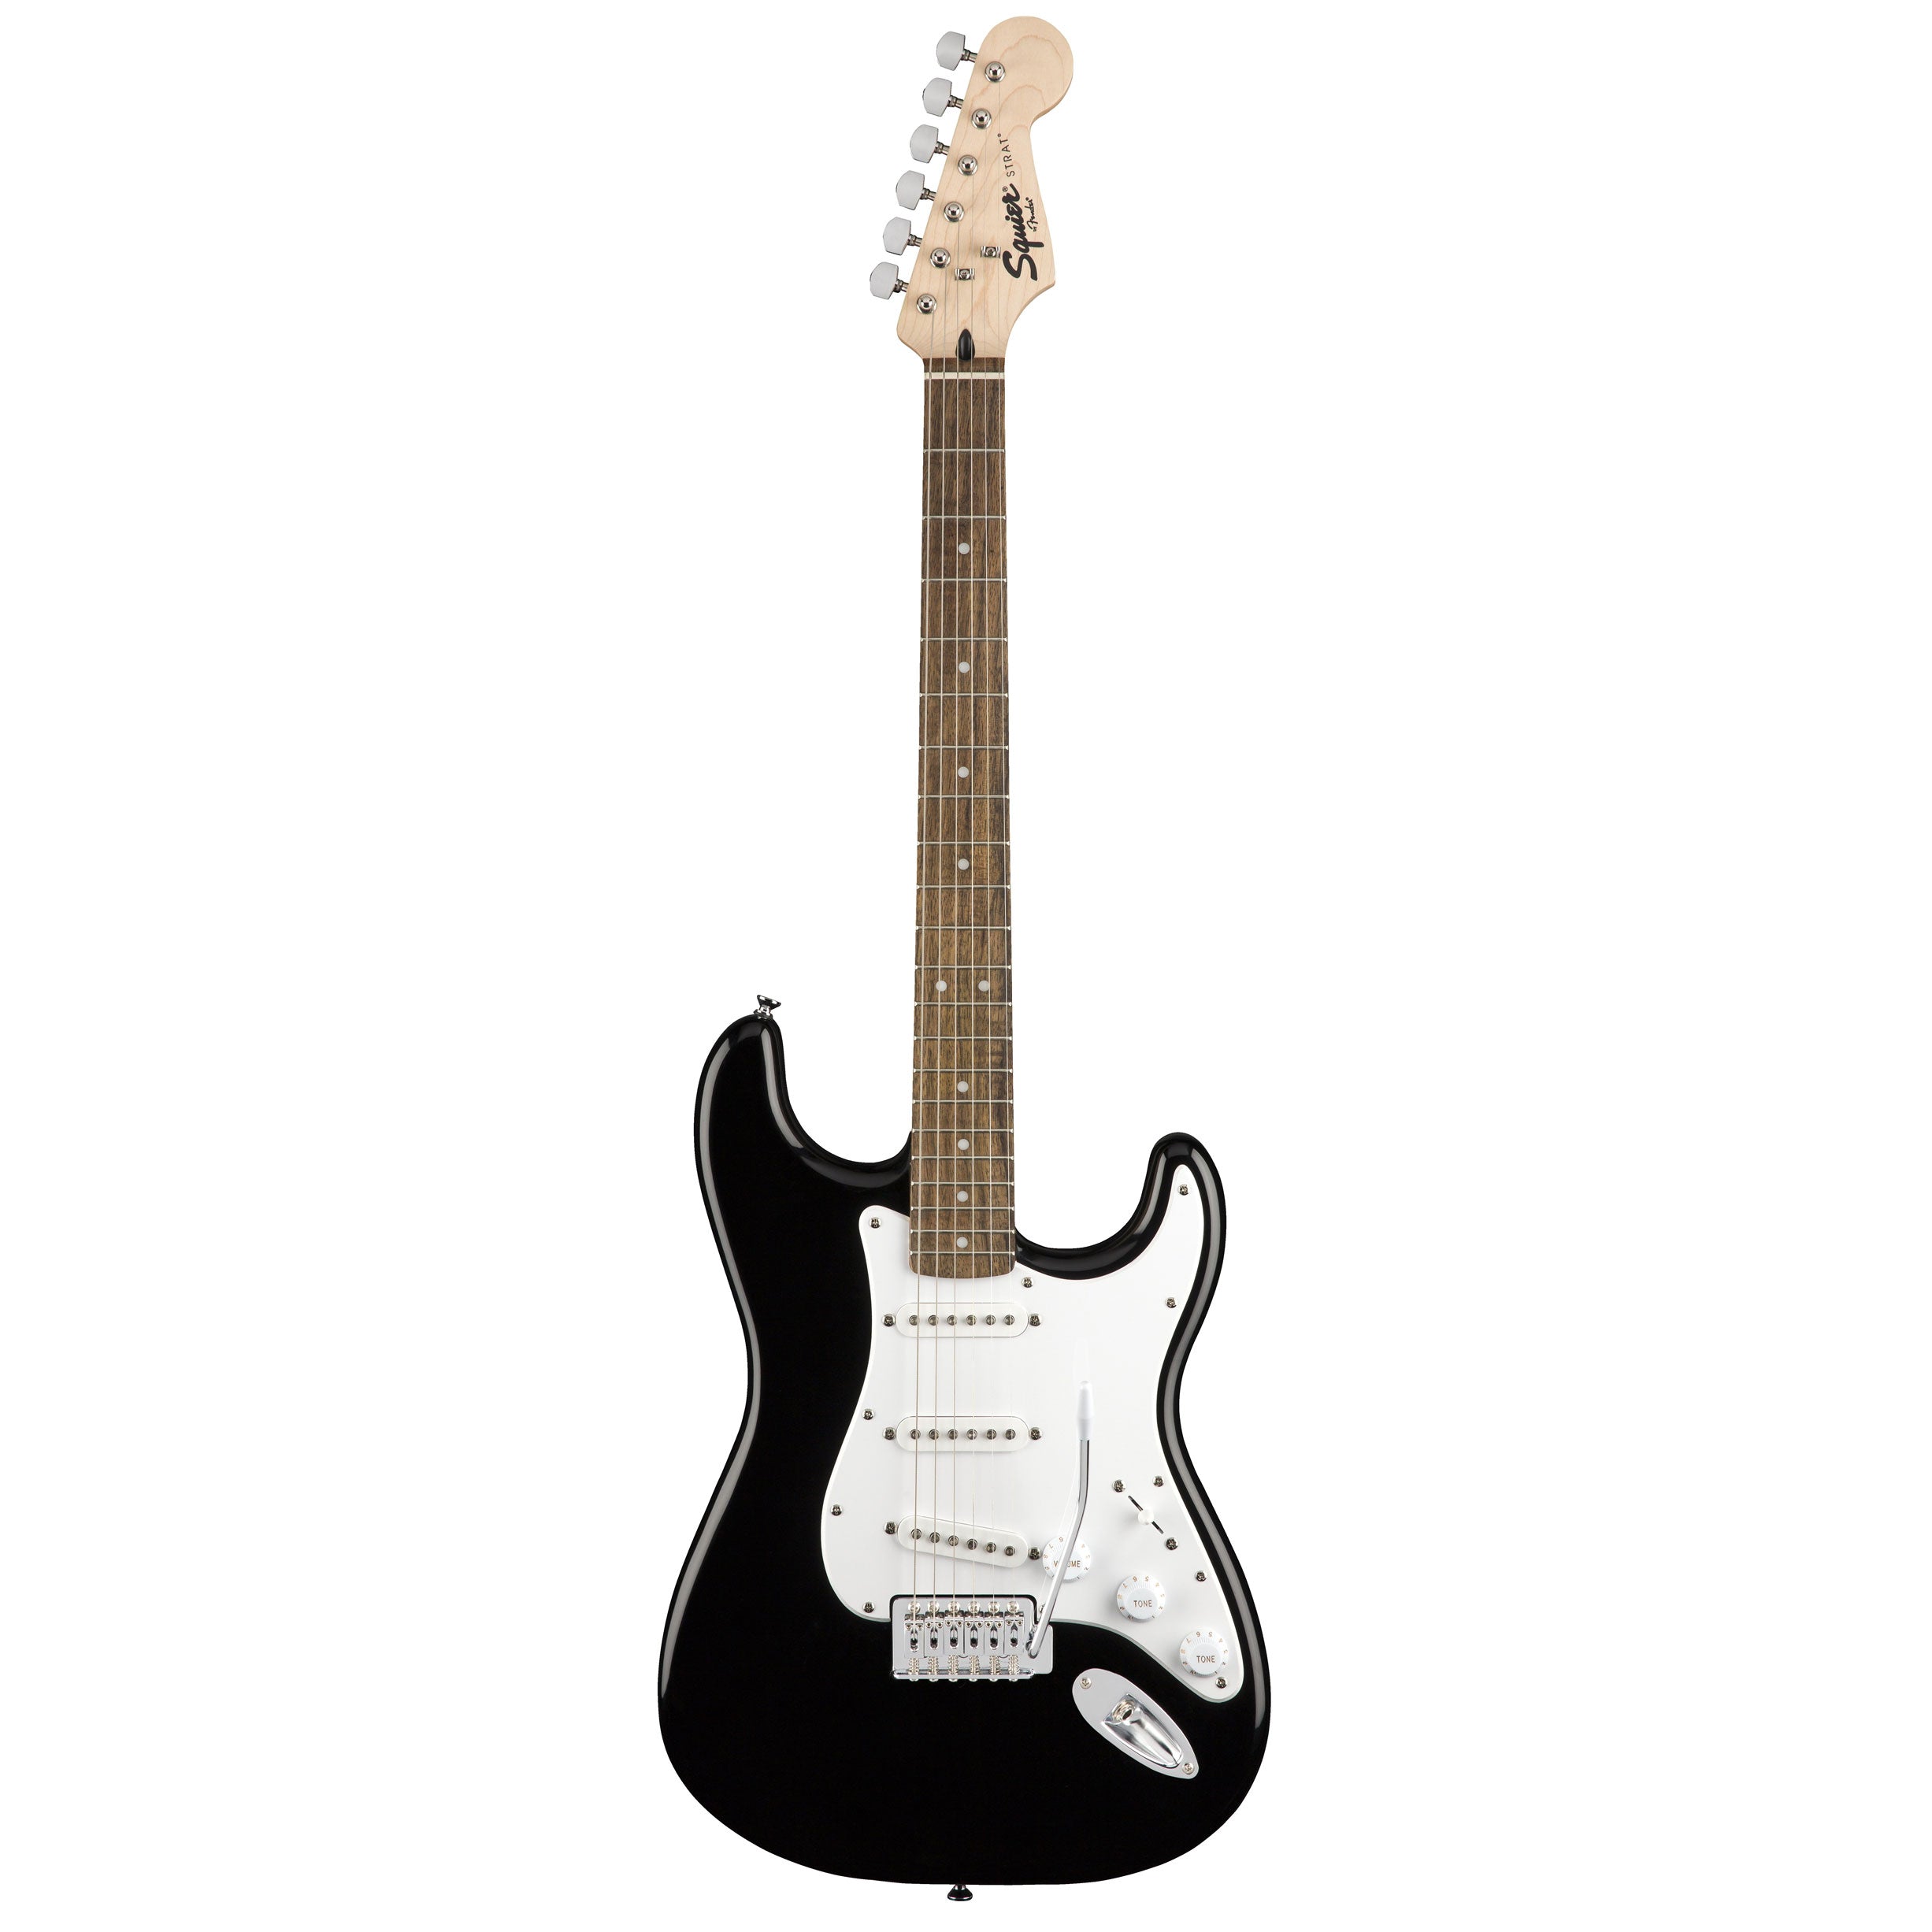 Squier Stratocaster Electric Guitar Starter Pack in Black – Alto Music